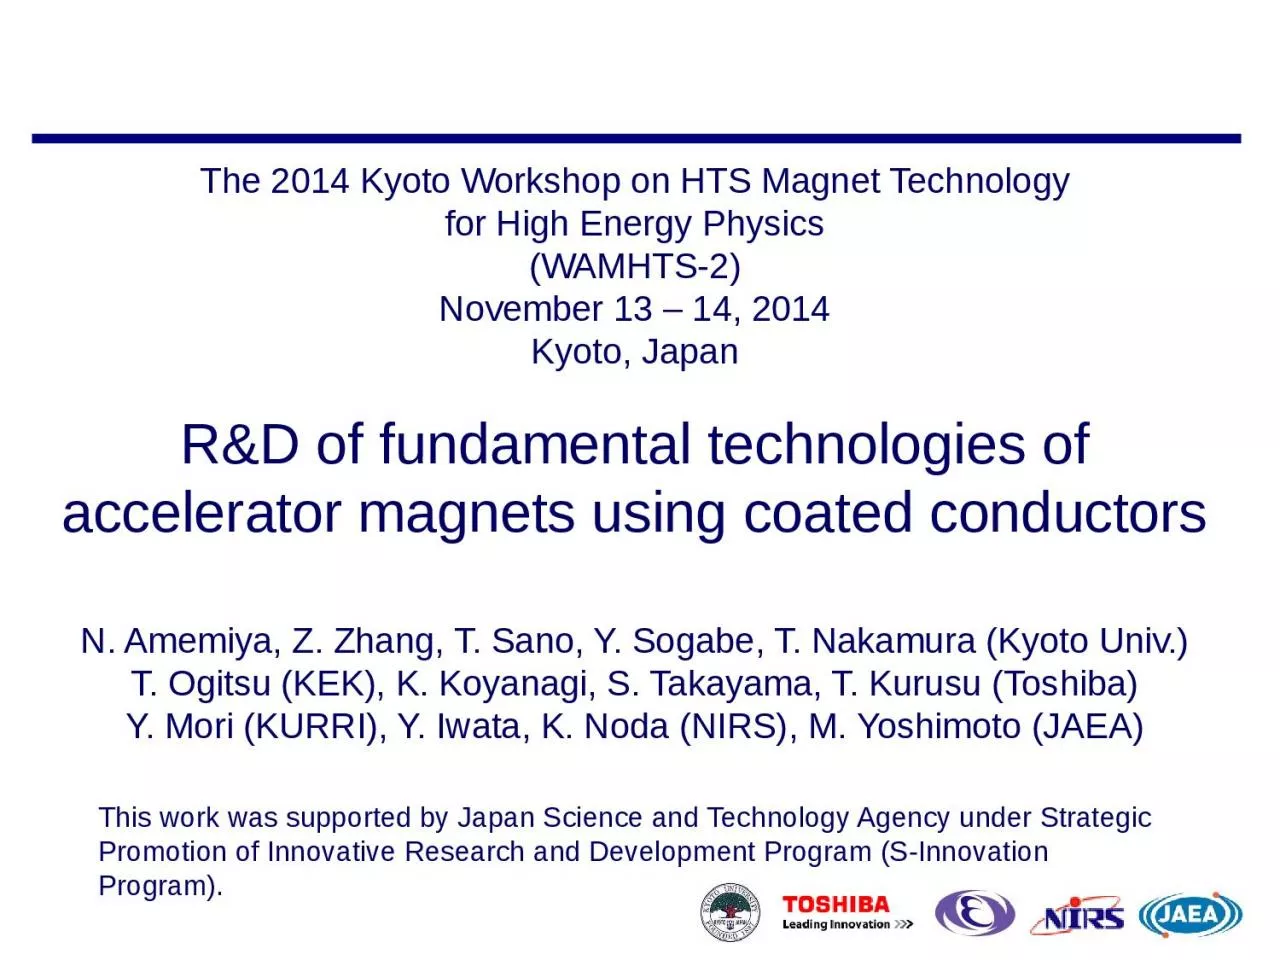 R&D of fundamental technologies of accelerator magnets using coated conductors